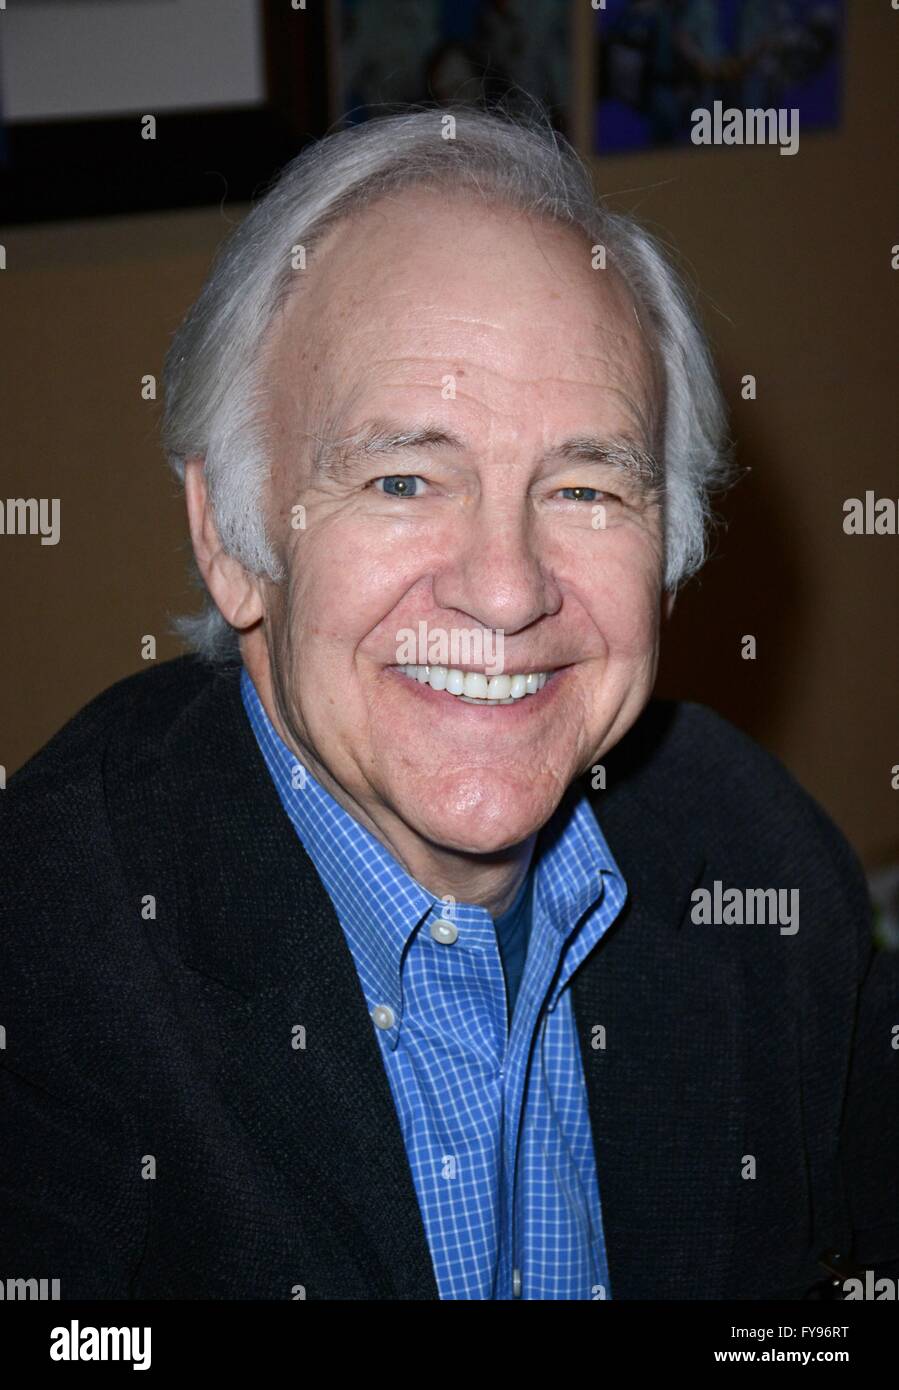 Parsippany, NJ, USA. 23rd Apr, 2016. Robert Pine in attendance for Chiller Theatre Toy, Model and Film Expo, Sheraton Parsippany, Parsippany, NJ April 23, 2016. Credit:  Derek Storm/Everett Collection/Alamy Live News Stock Photo